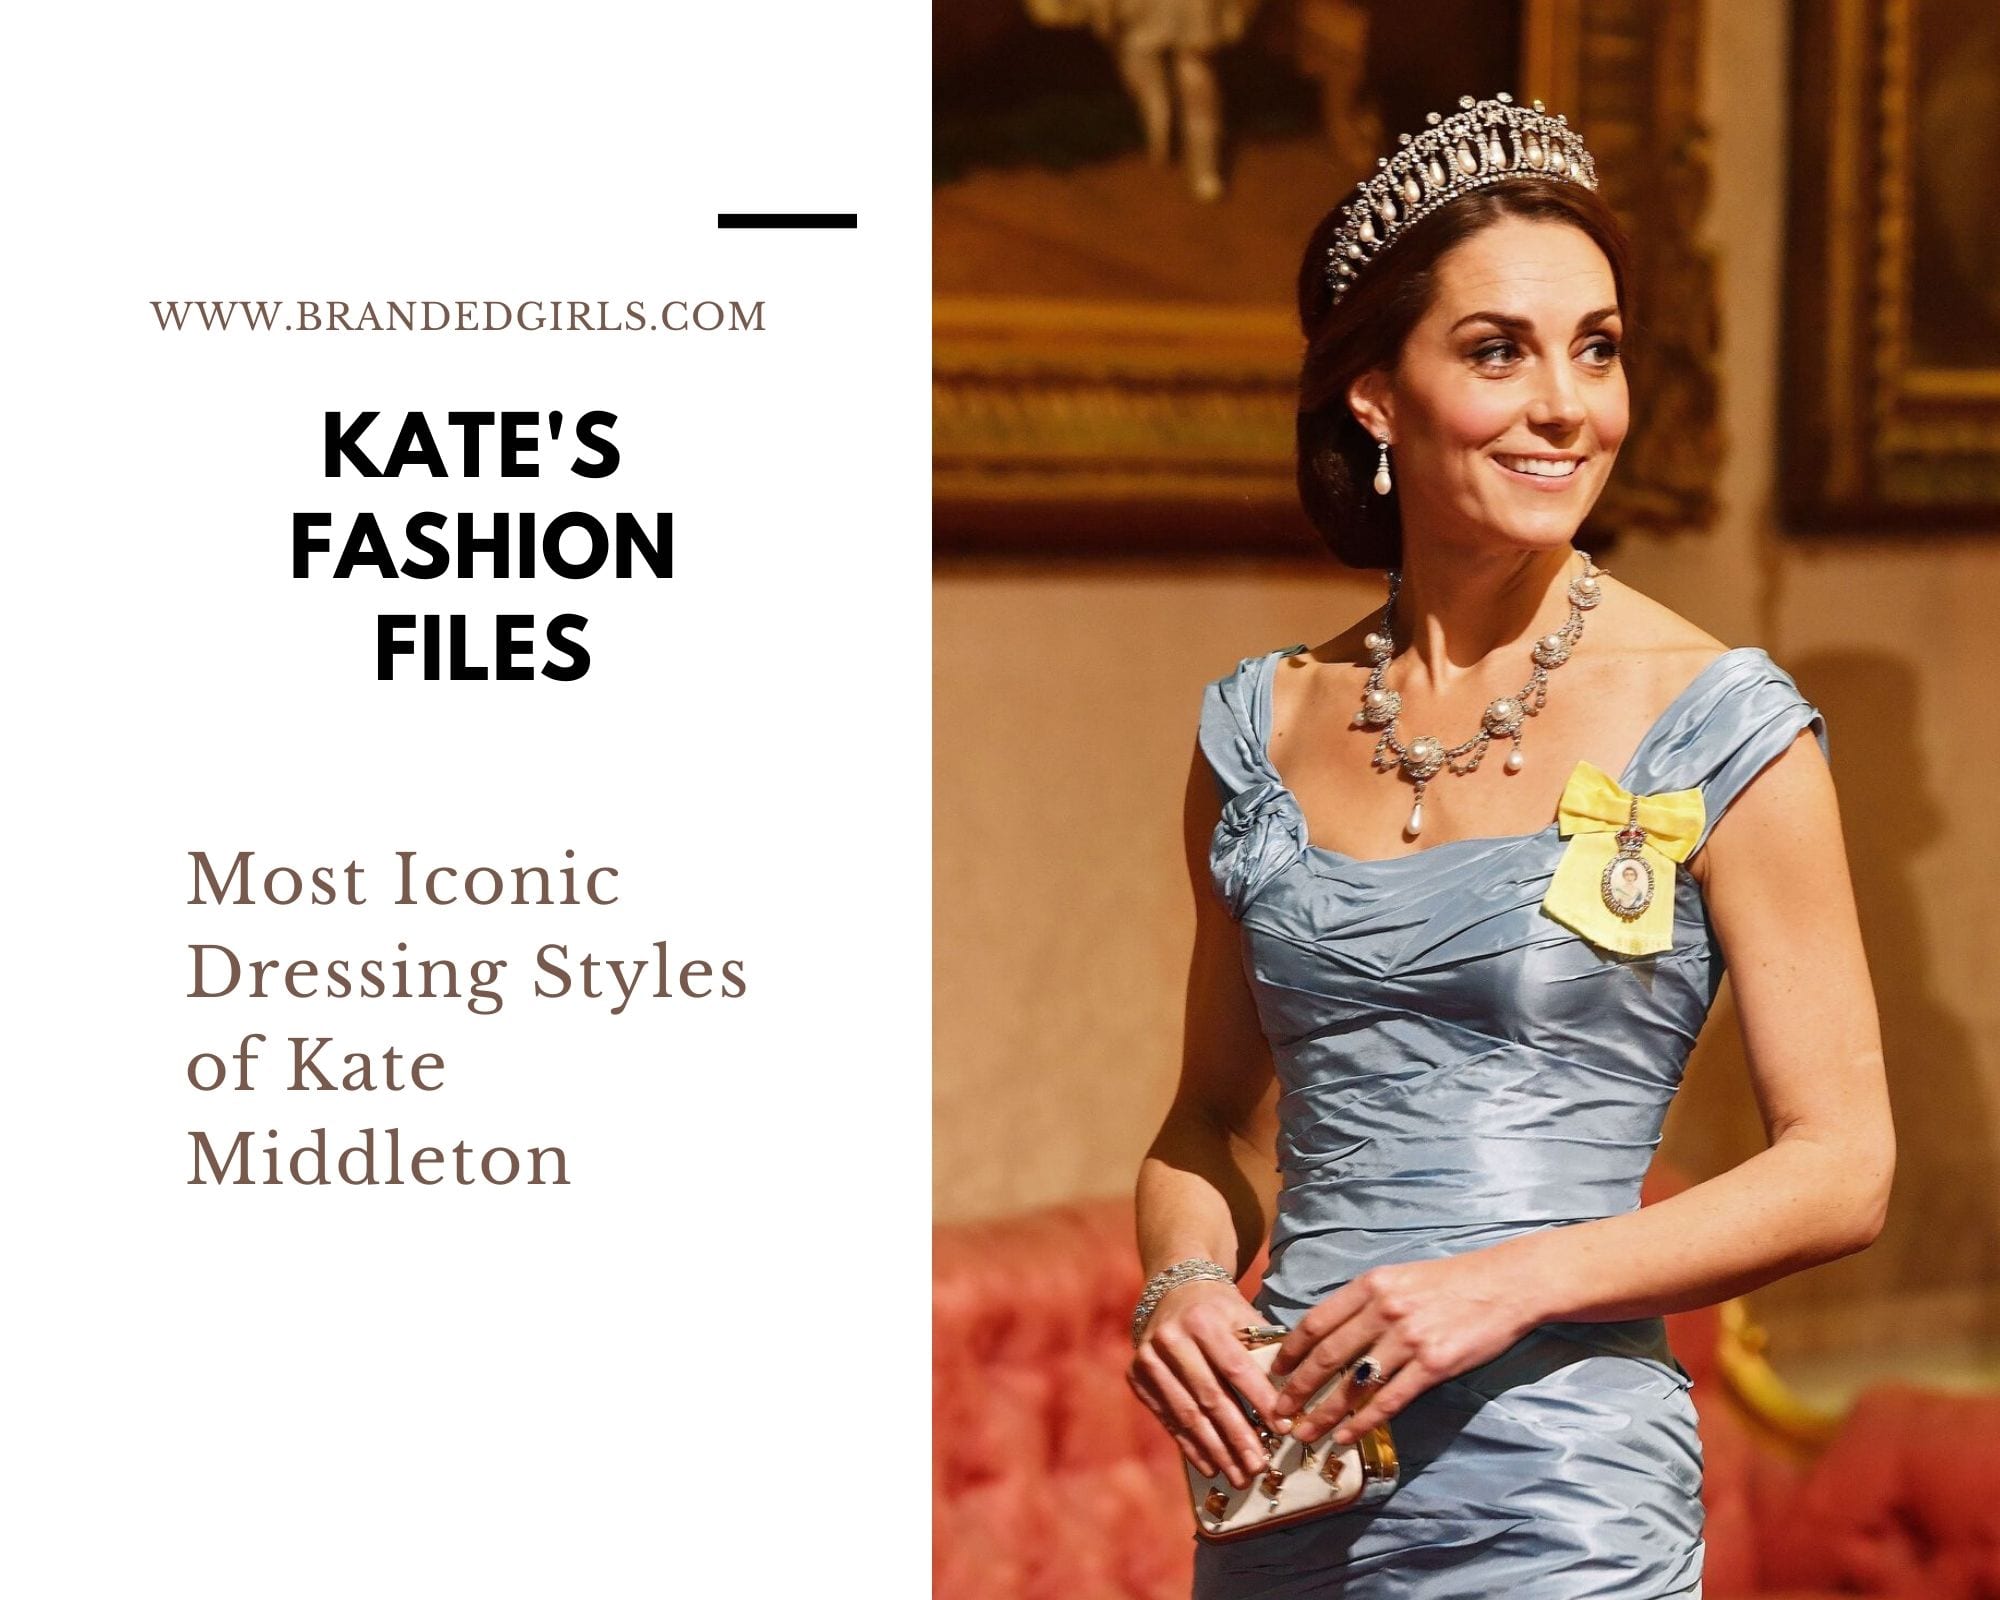 Kate Middleton's Outfits - 25 Best Dressing Styles Of Kate's Style to copy